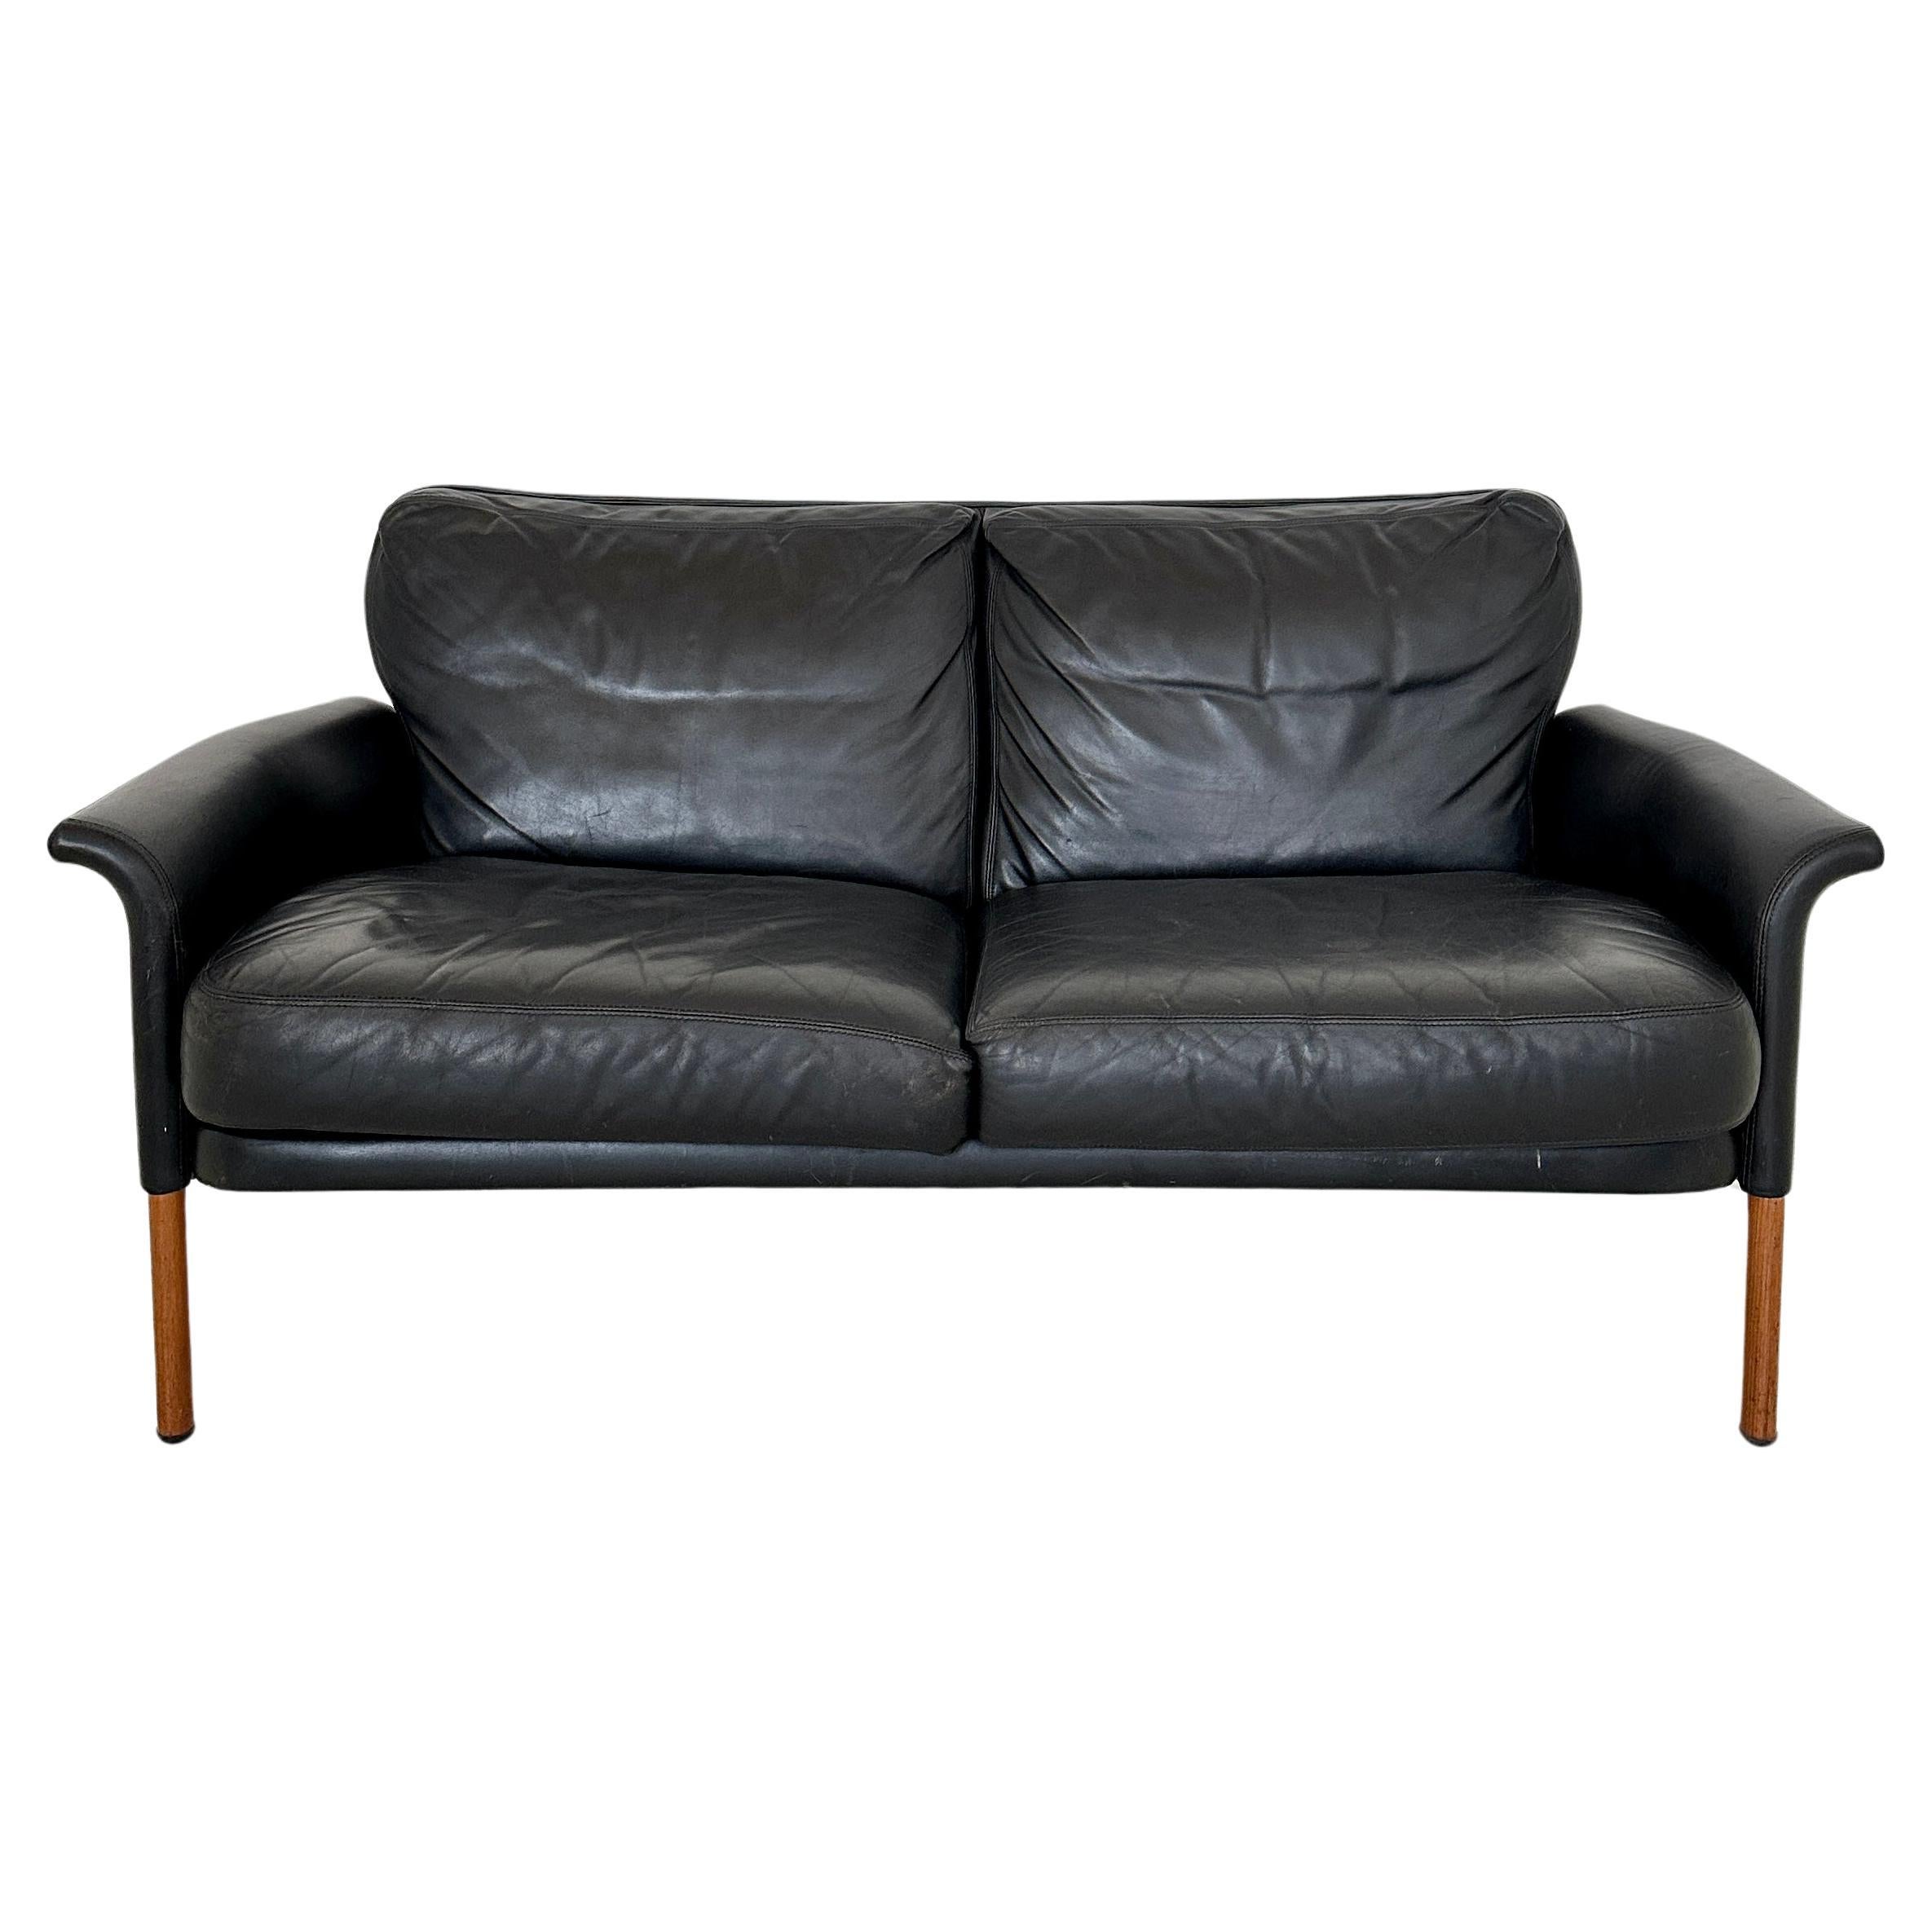 This beautiful Mid Century 2-Seater Leather Sofa by Hans Olsen was made in Denmark in the 1960s.
A unique piece which is a great eye-catcher for your antique, modern, space age or mid-century interior.
If you have any more questions we are very